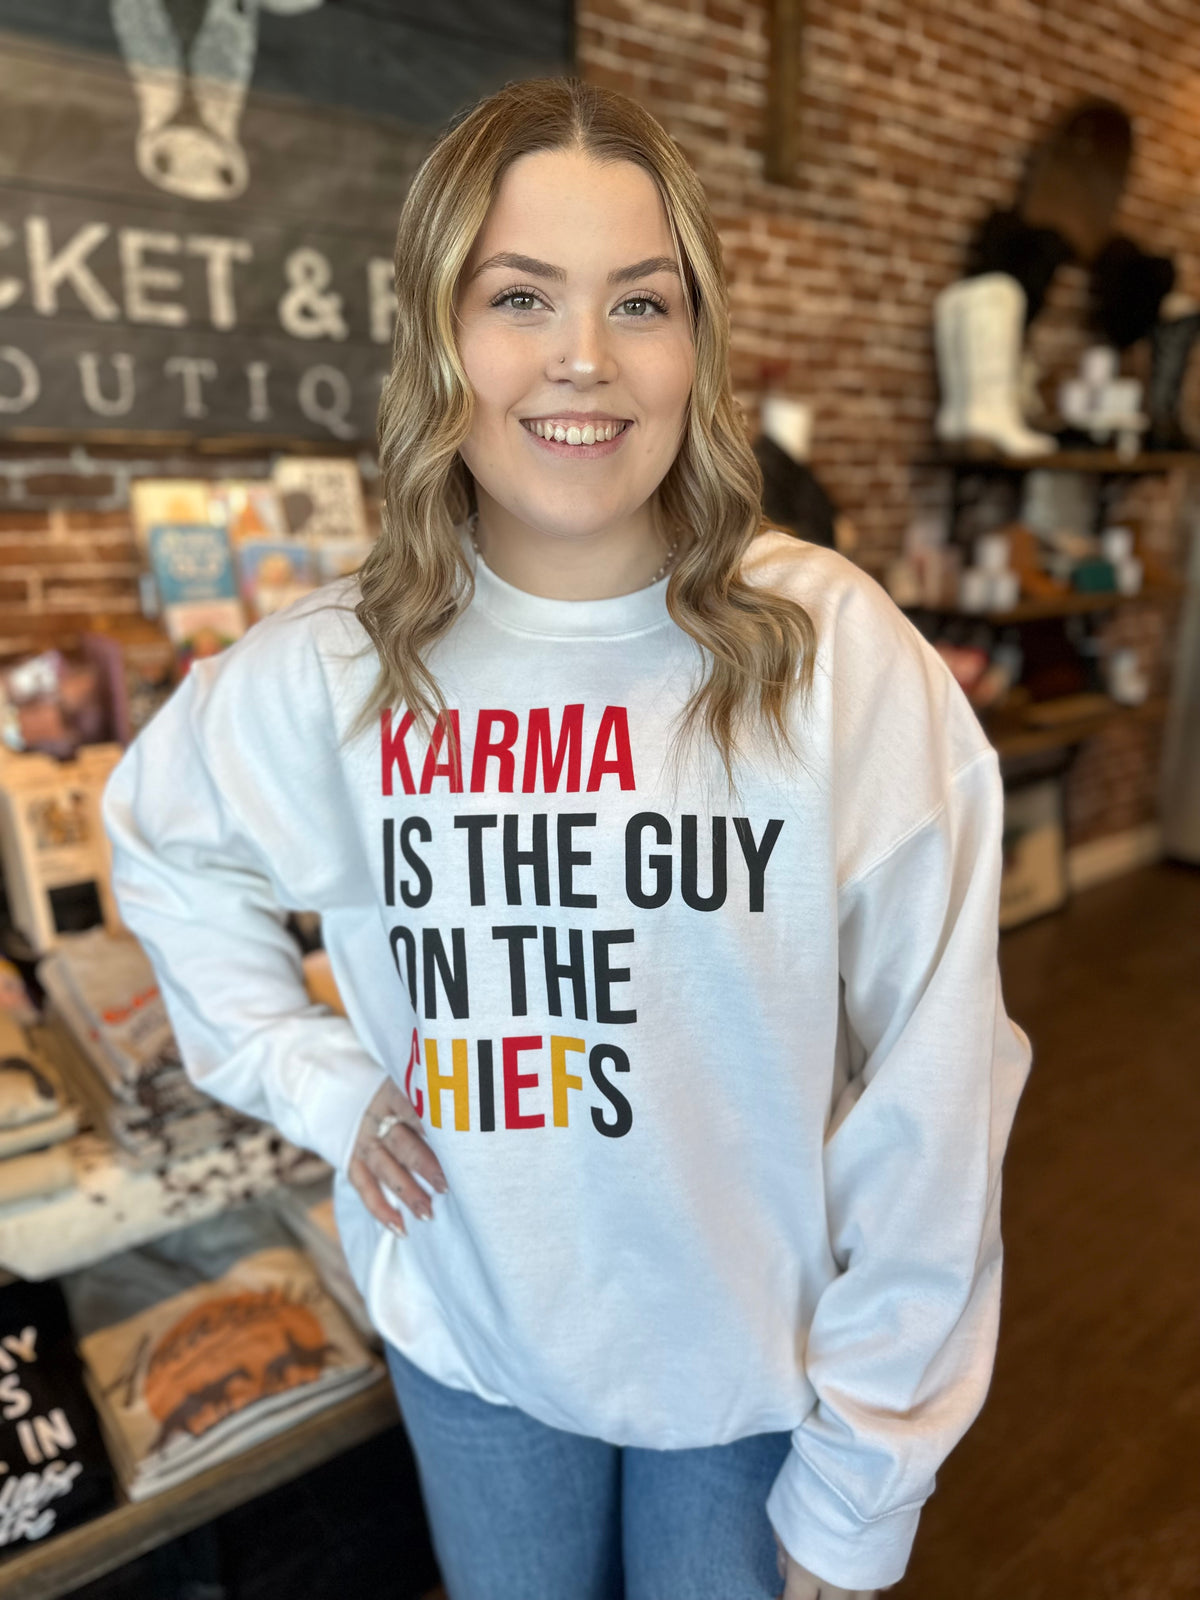 Karma is the guy on the Chiefs